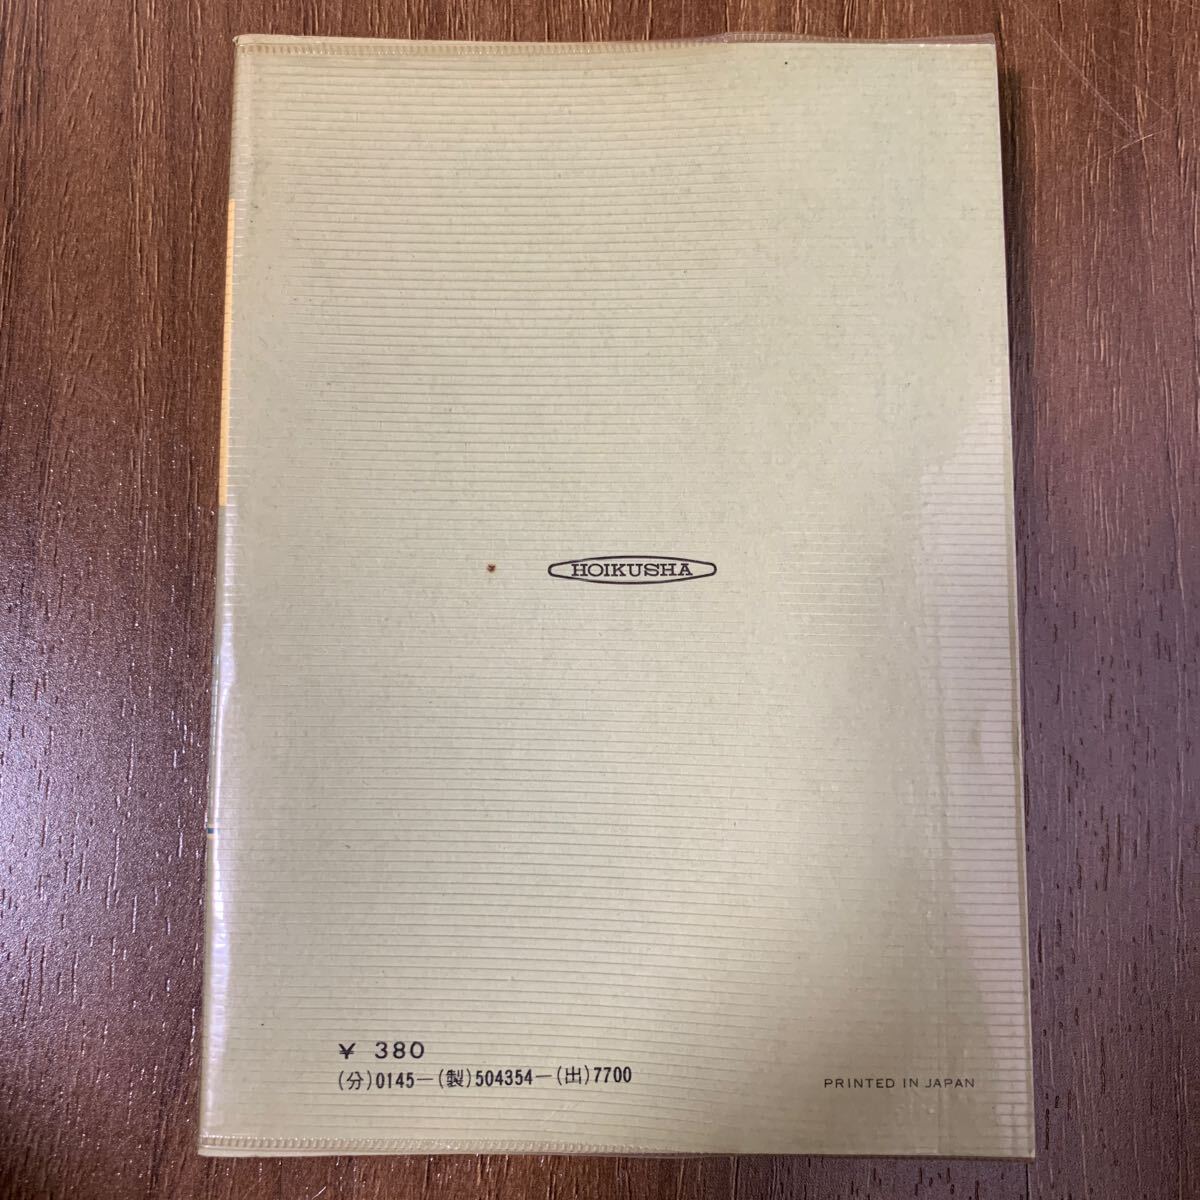 [ goods with special circumstances ] color books 354. edible wild plants introduction mountain rice field . man mountain rice field three-ply . the first version Hoikusha 